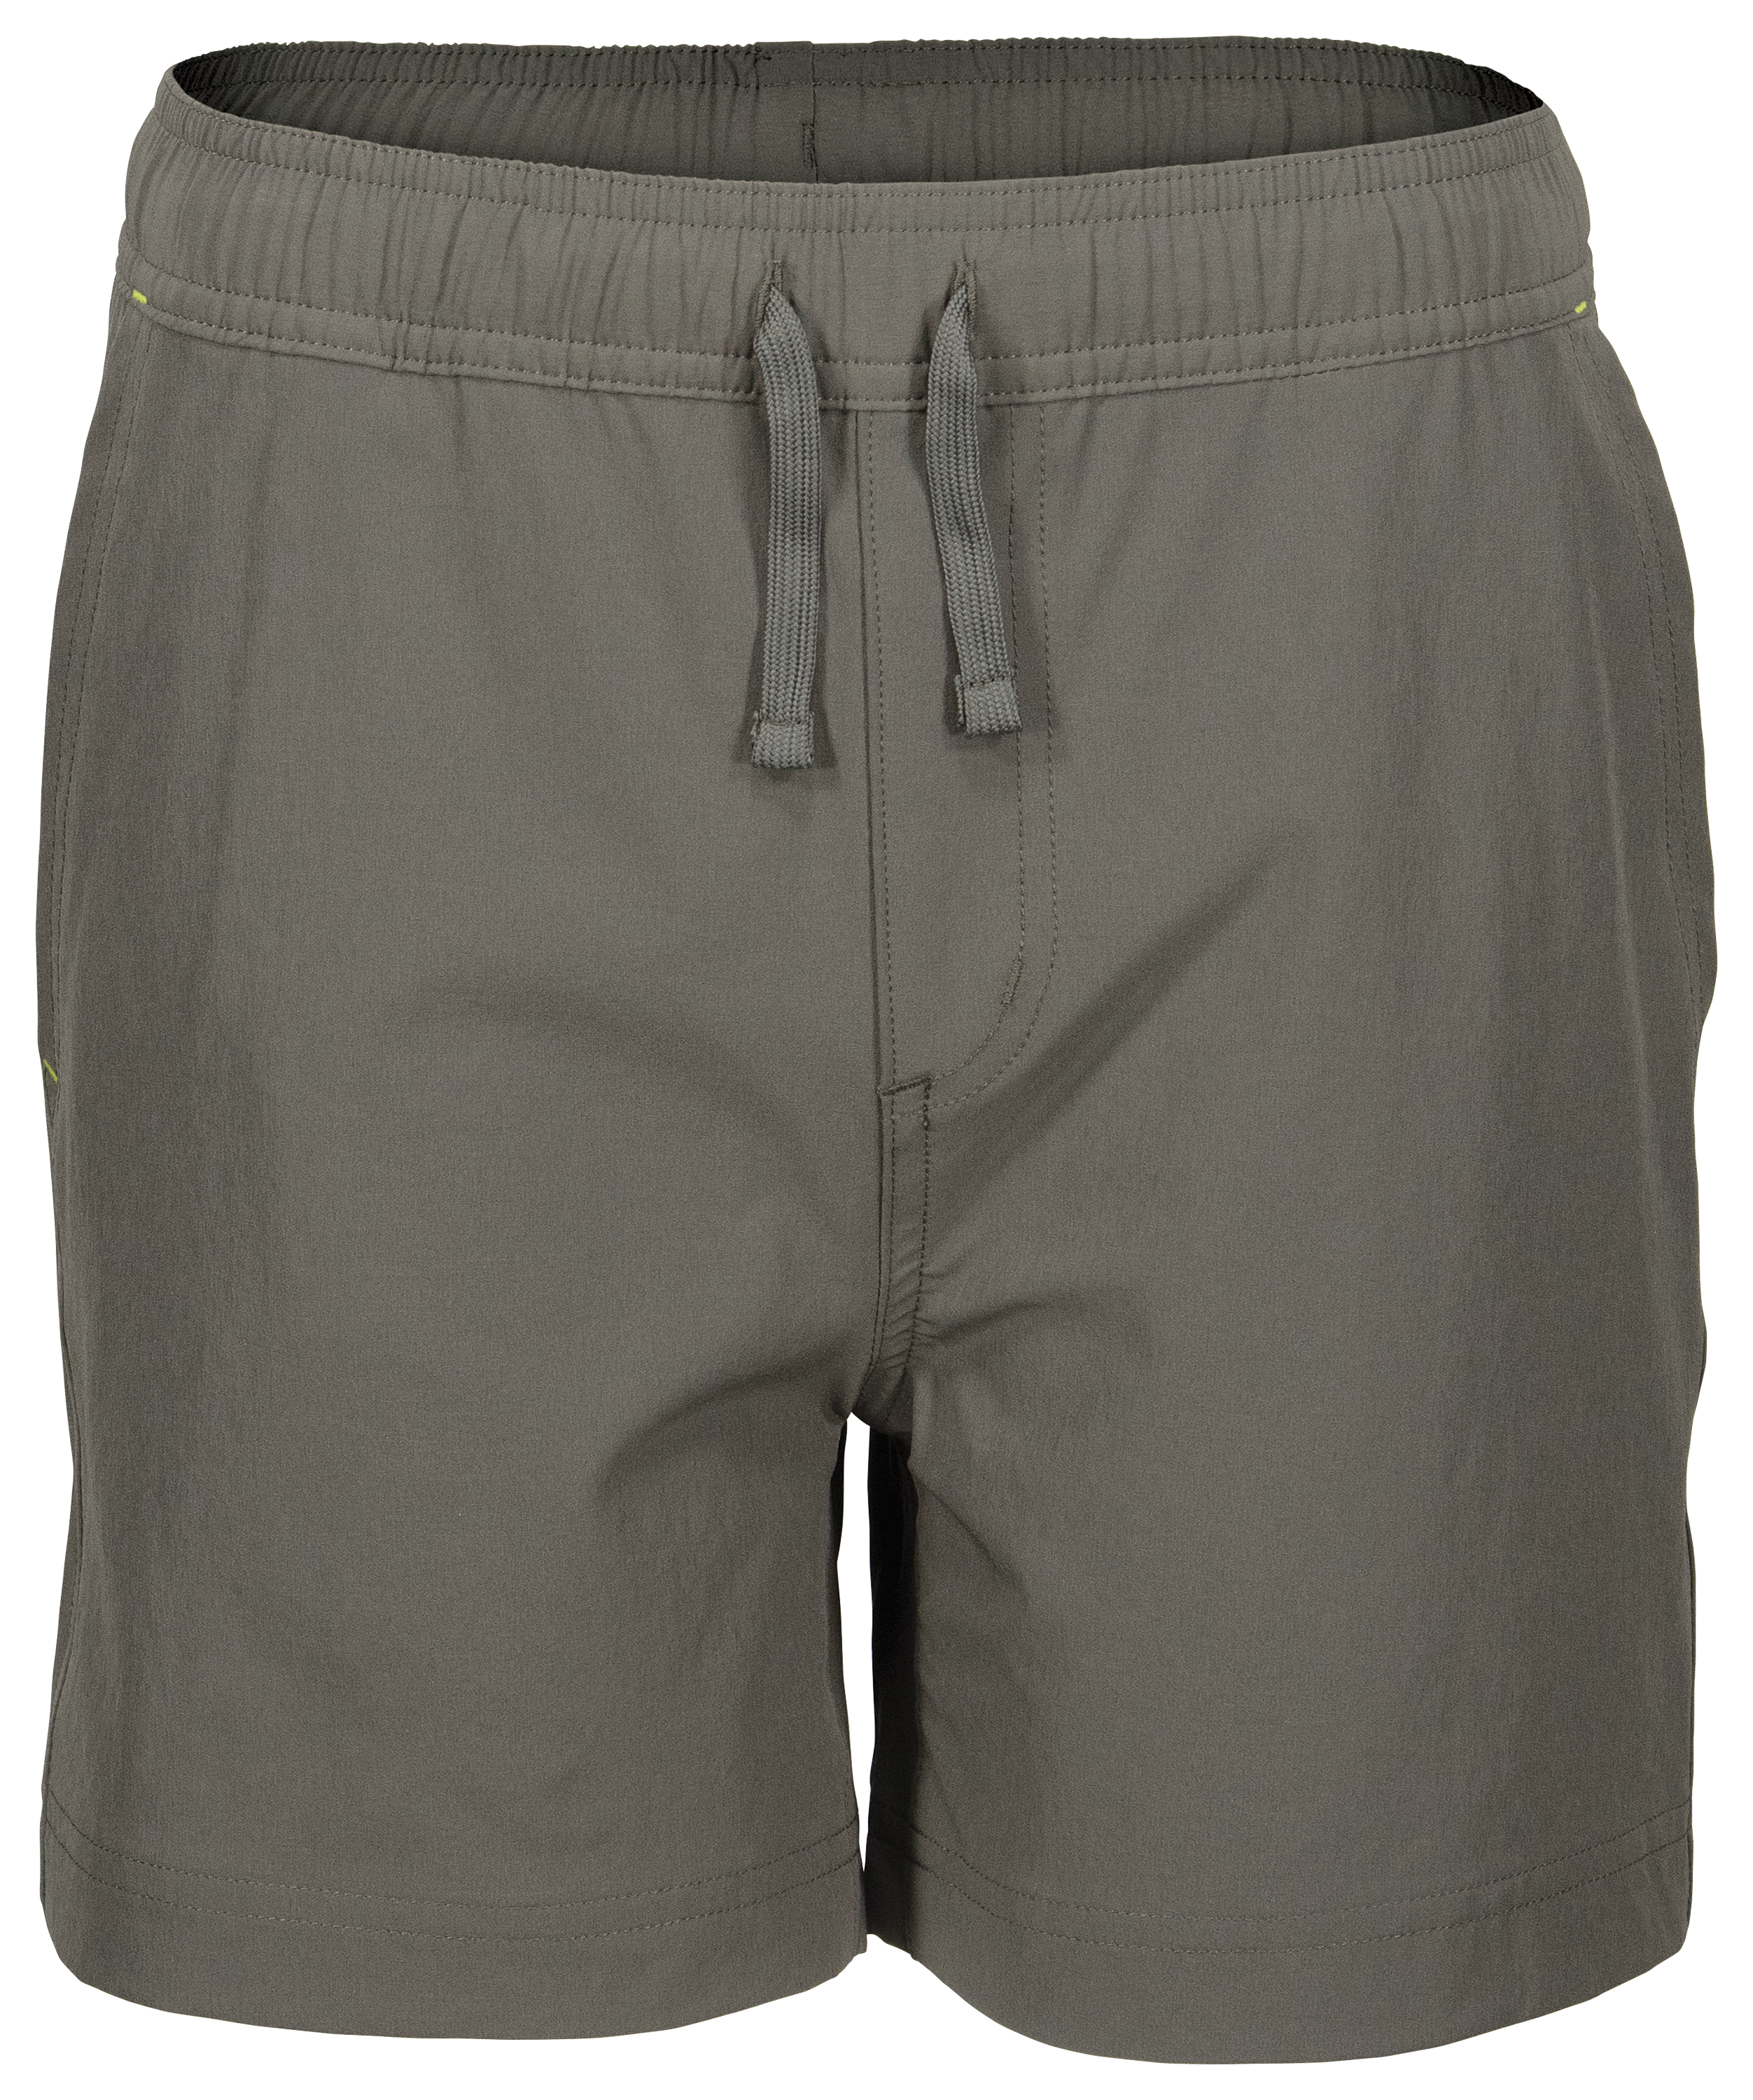 World Wide Sportsman Charter Pull-On Shorts for Boys